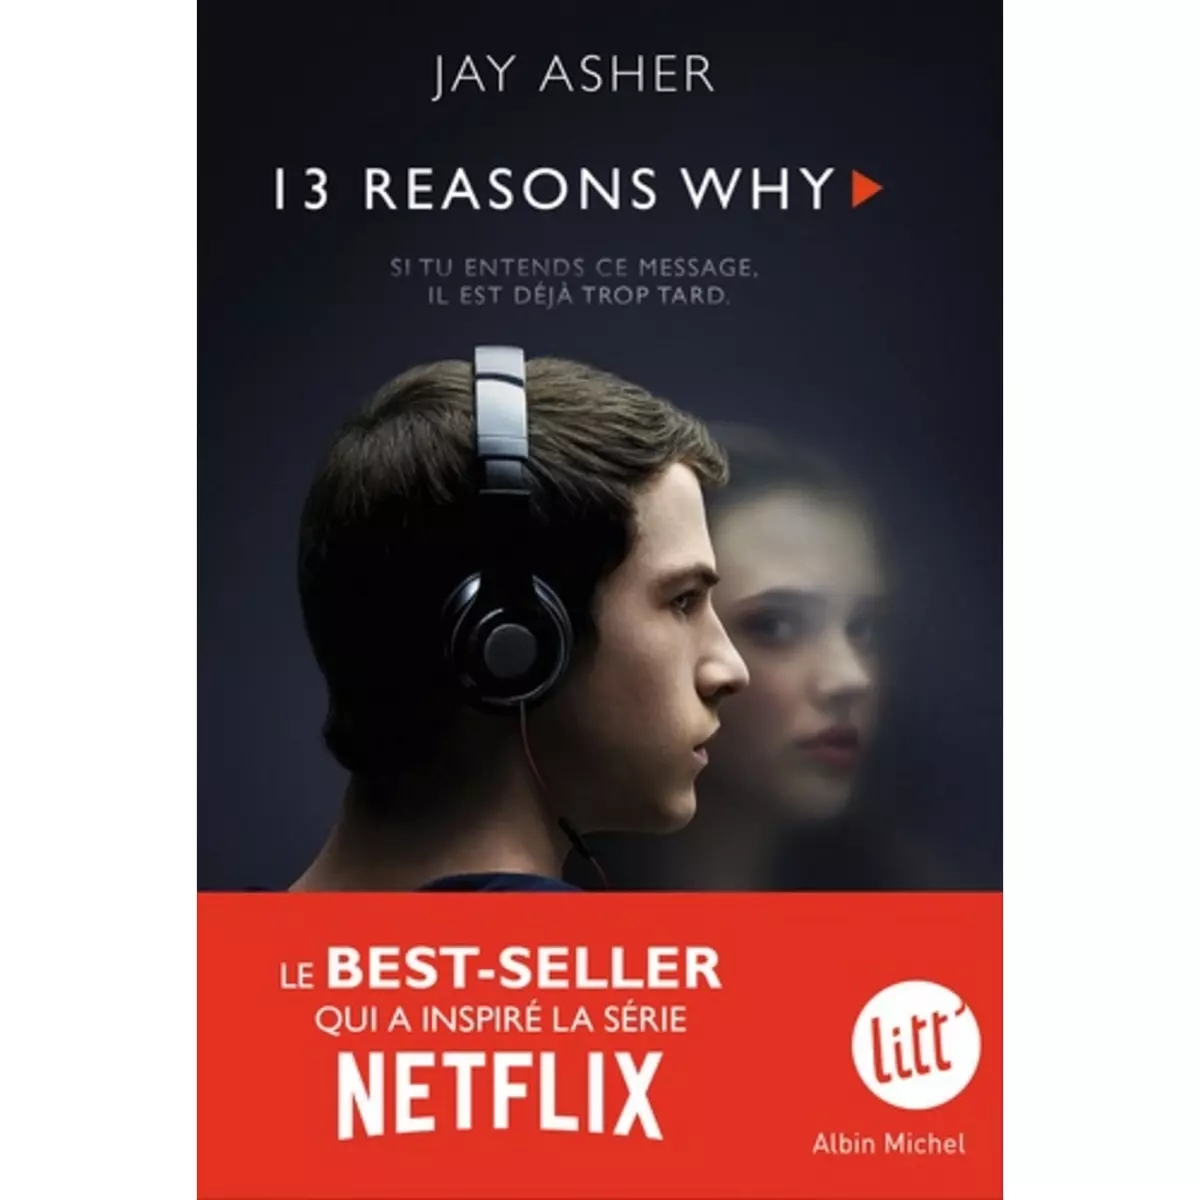  13 REASONS WHY, Asher Jay